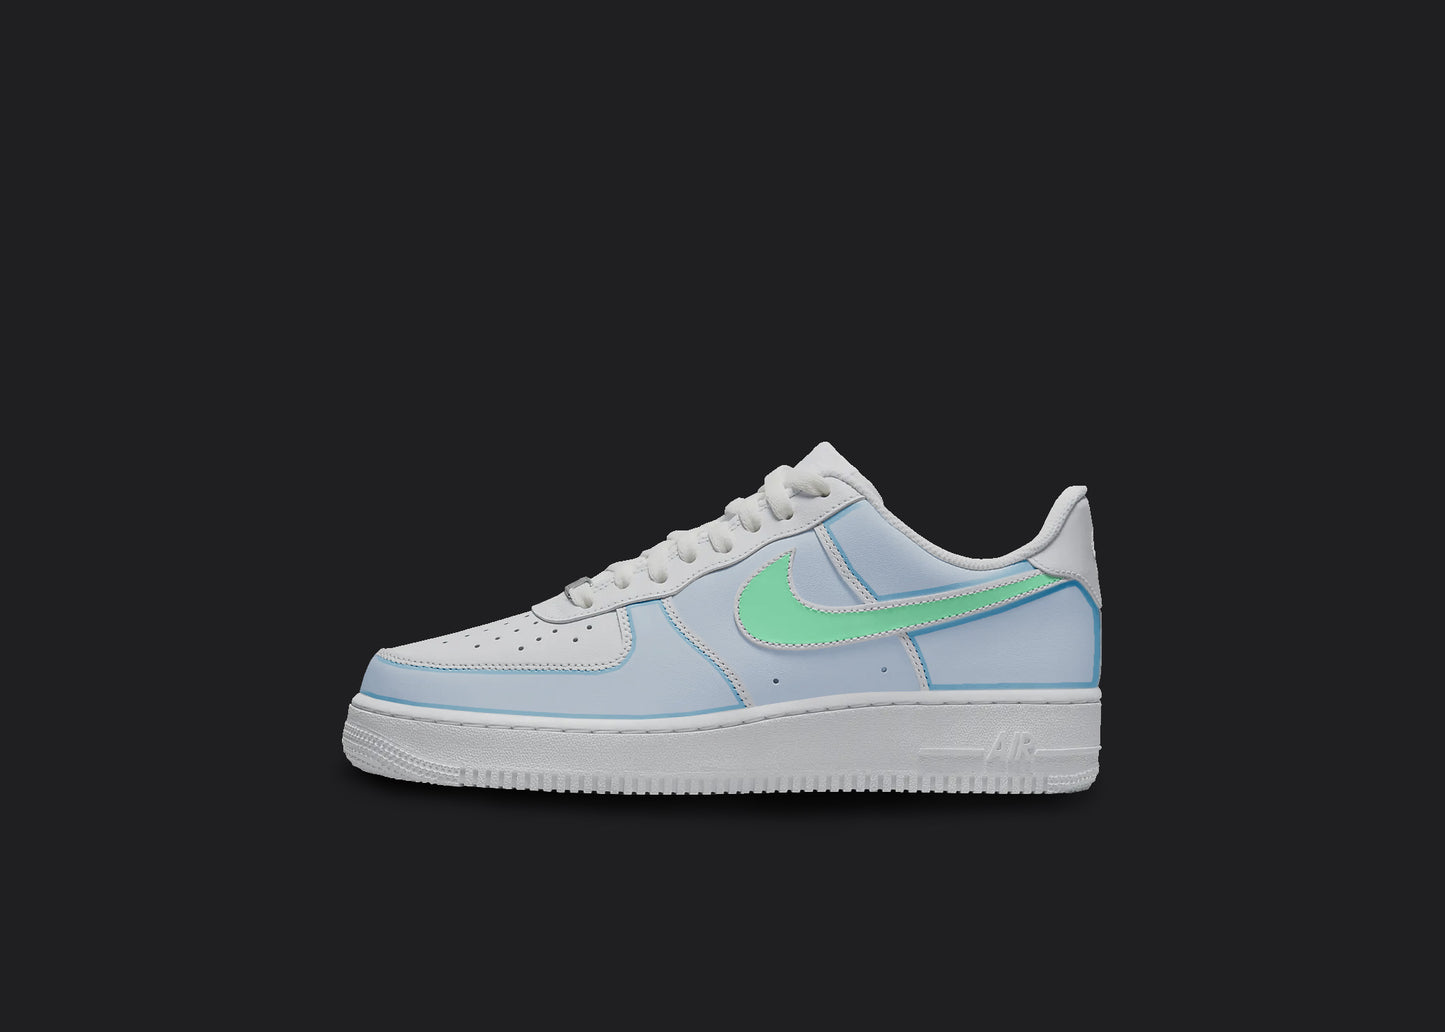 The image is of a Custom Nike Air force 1 sneaker on a blank black background. The pastel blue custom sneaker have a mint green nike logo on the side.